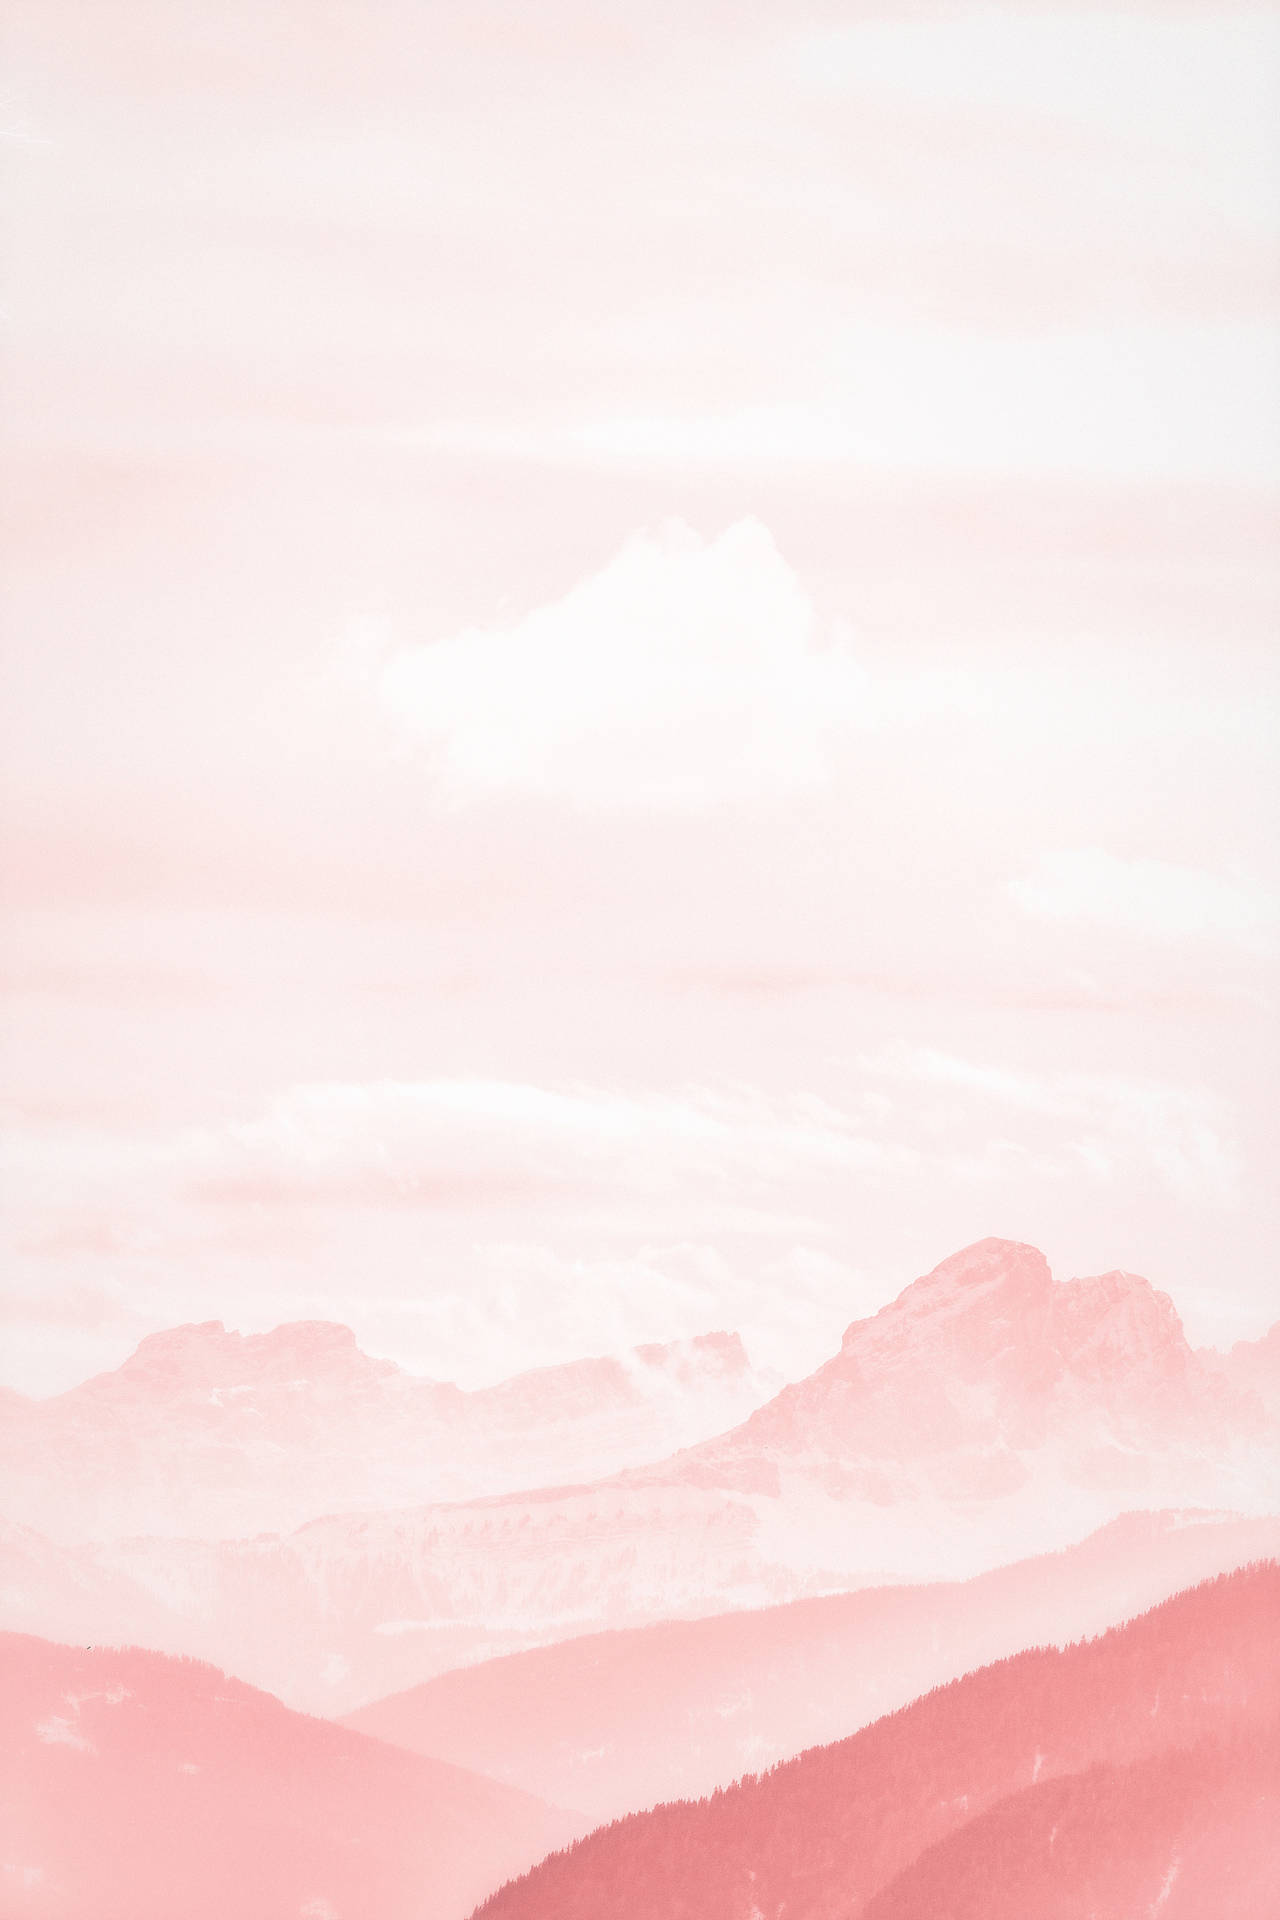 A Pink Sky With Mountains Wallpaper